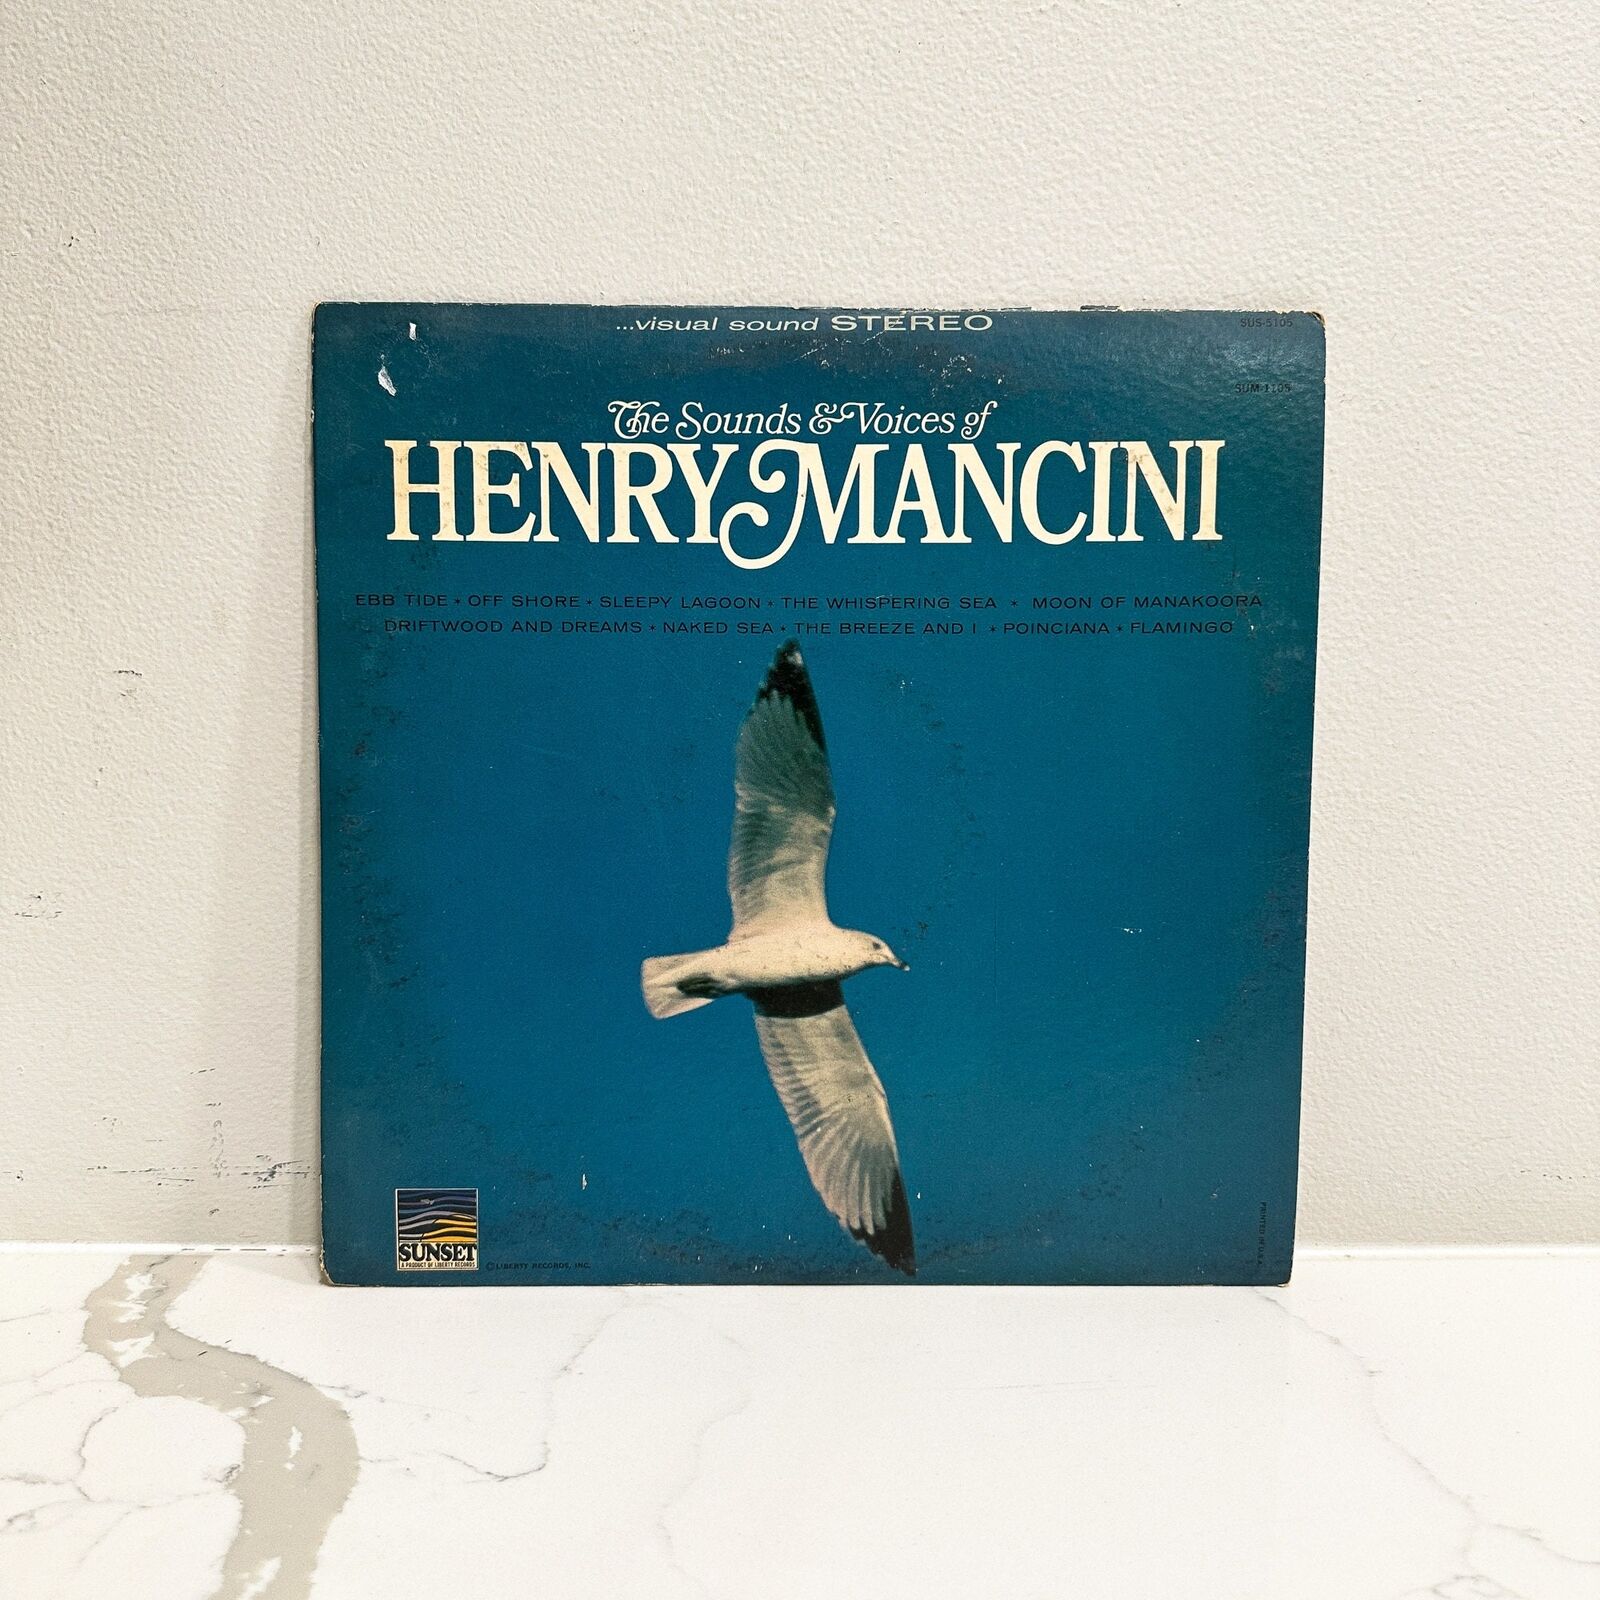 Henry Mancini – The Sounds & Voices Of Henry Mancini - Vinyl LP Record - 1966